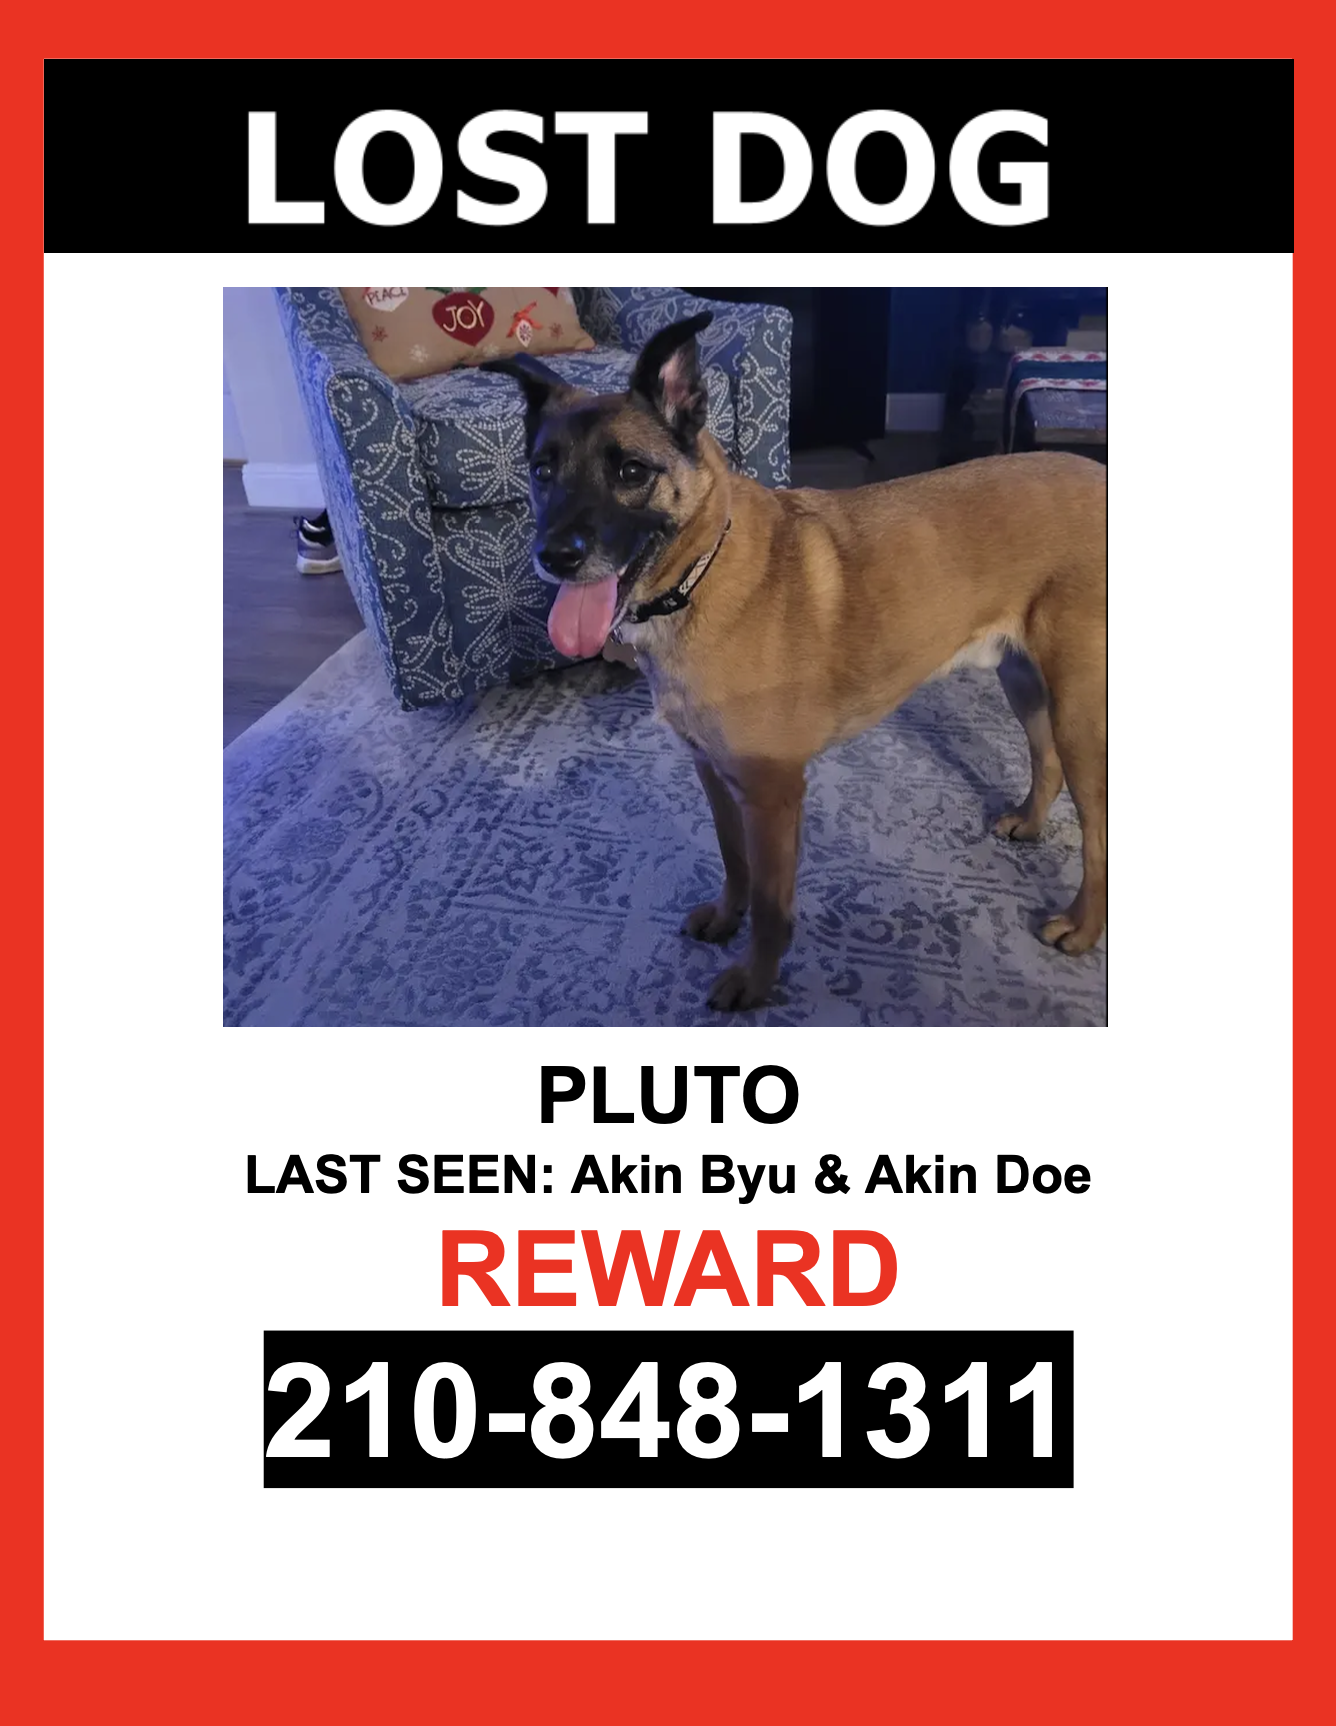 Image of Pluto, Lost Dog